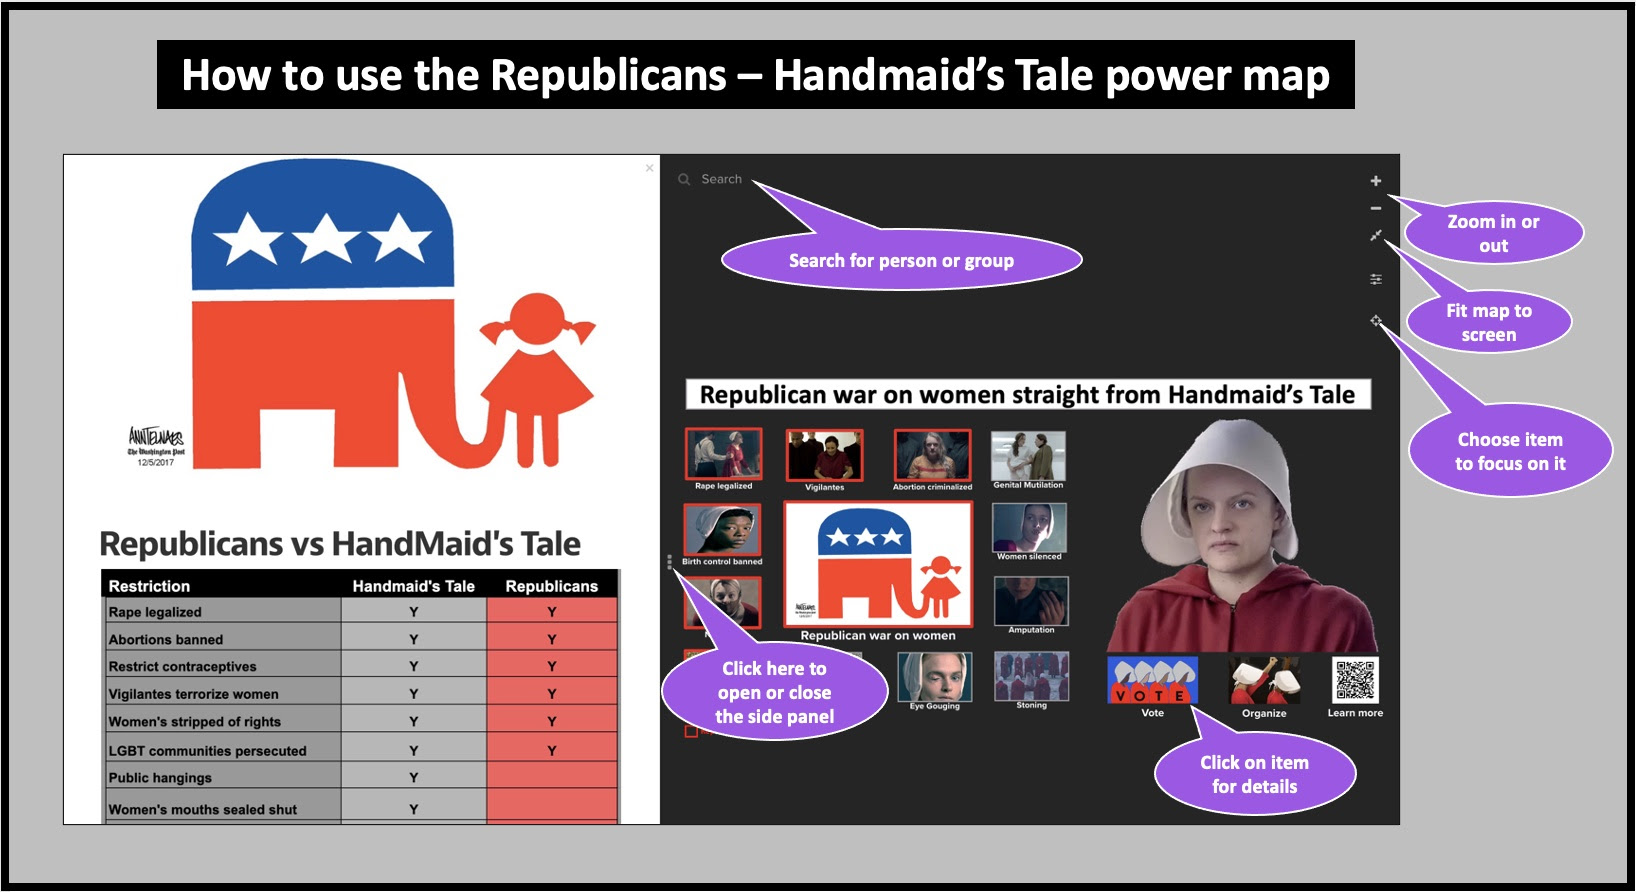 How to use the Republicans - Handmaid's Tale power map